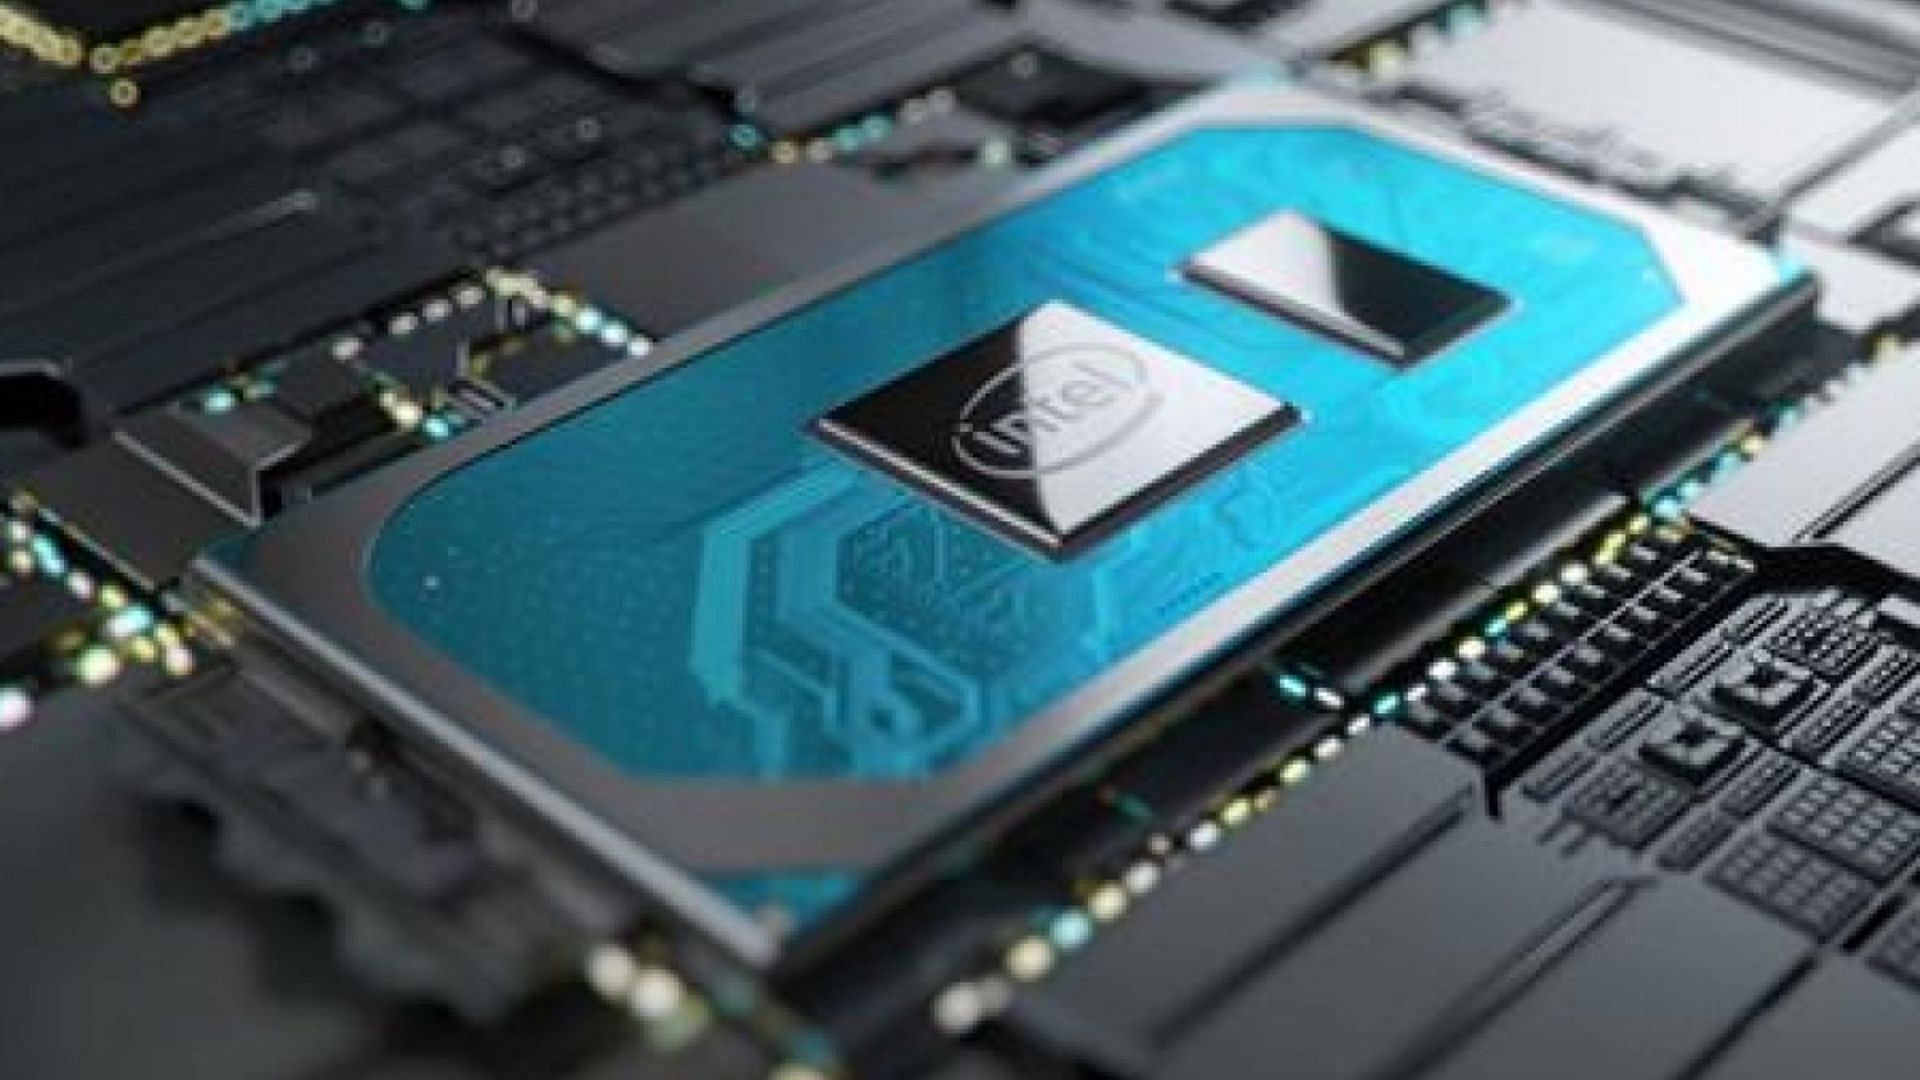 Unreleased Intel Core i3-14100 Raptor Lake Refresh CPU listed at